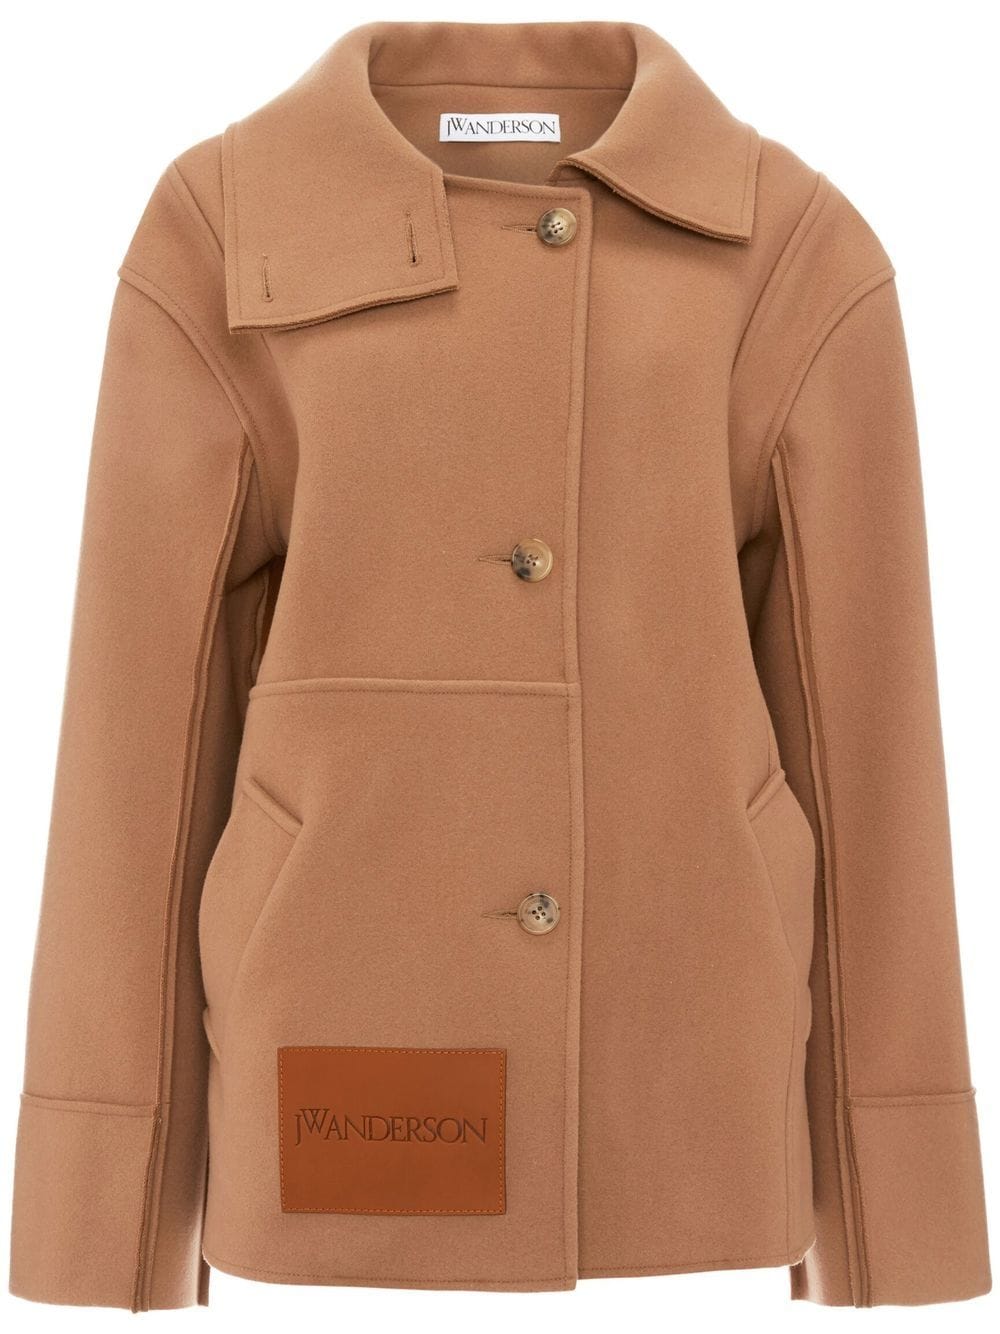 JW Anderson logo-patch detail coat - Brown